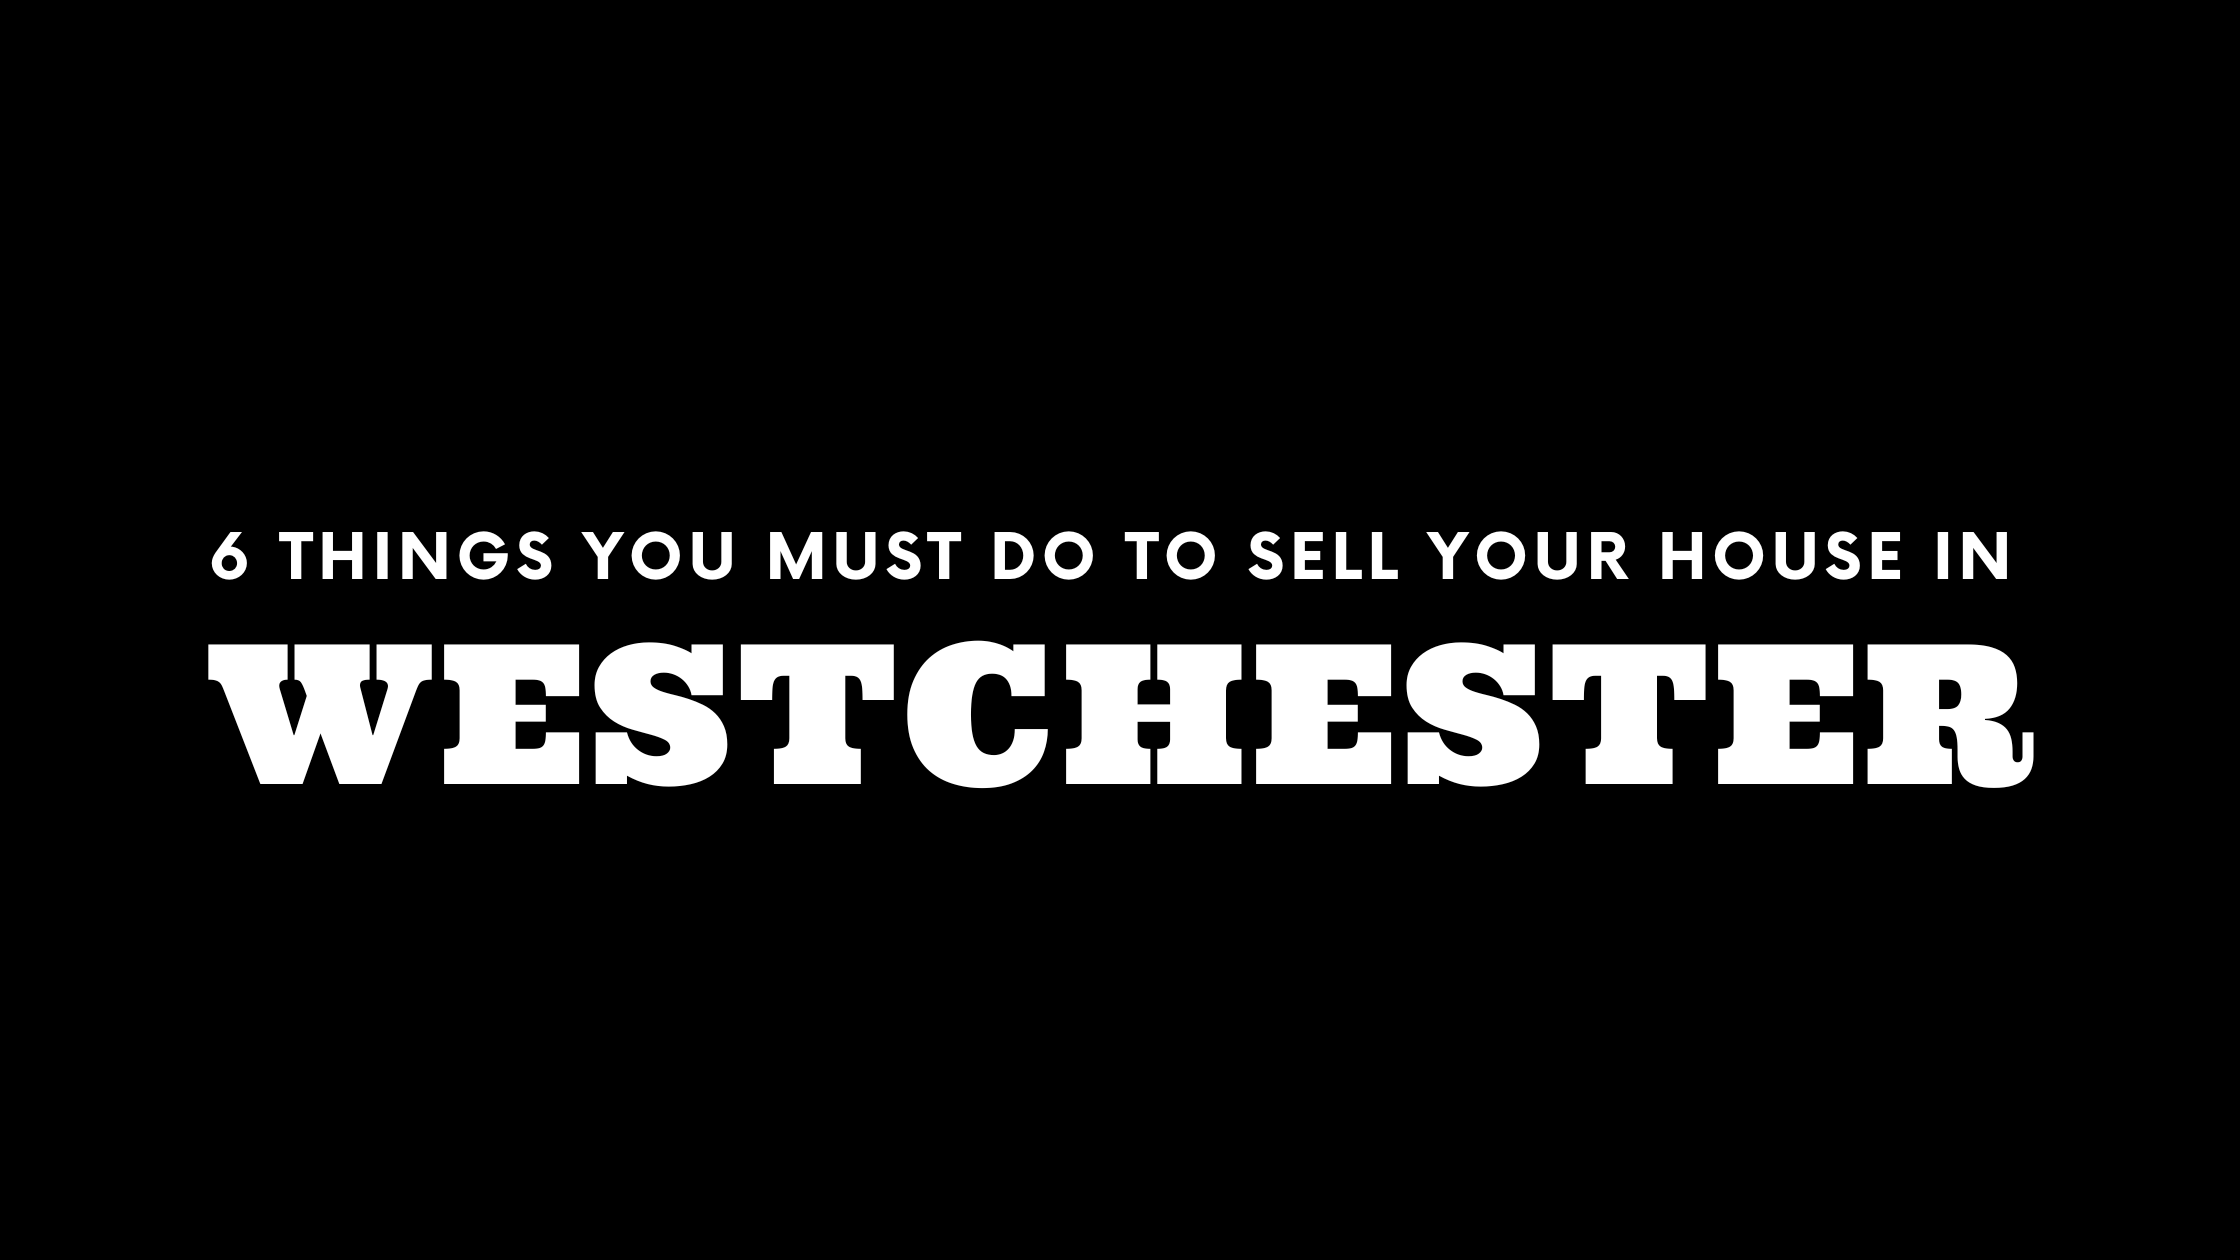 Selling Your House in Westchester? 6 Things You MUST Do!